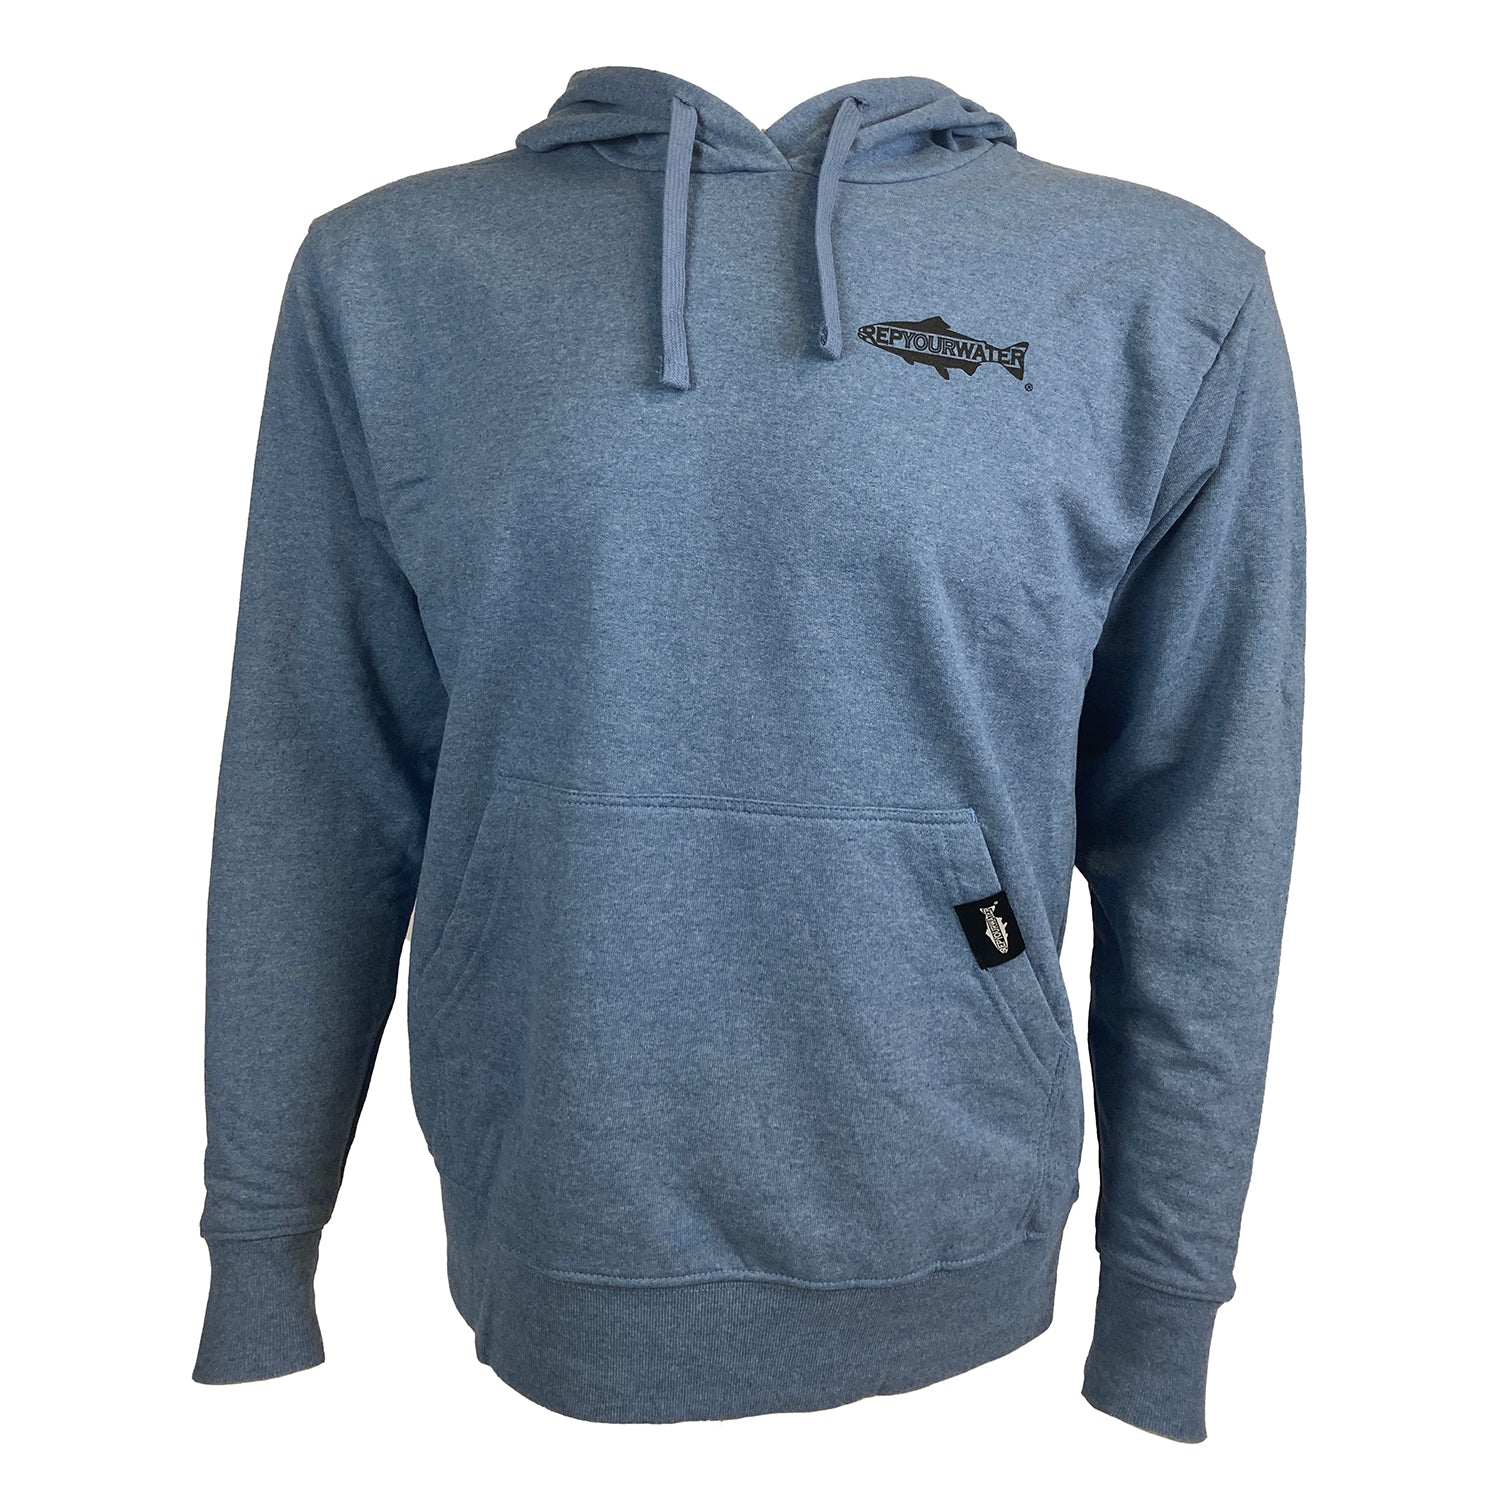 Blue hoody shown from the front with Rep Your Water logo on wearer's left chest.